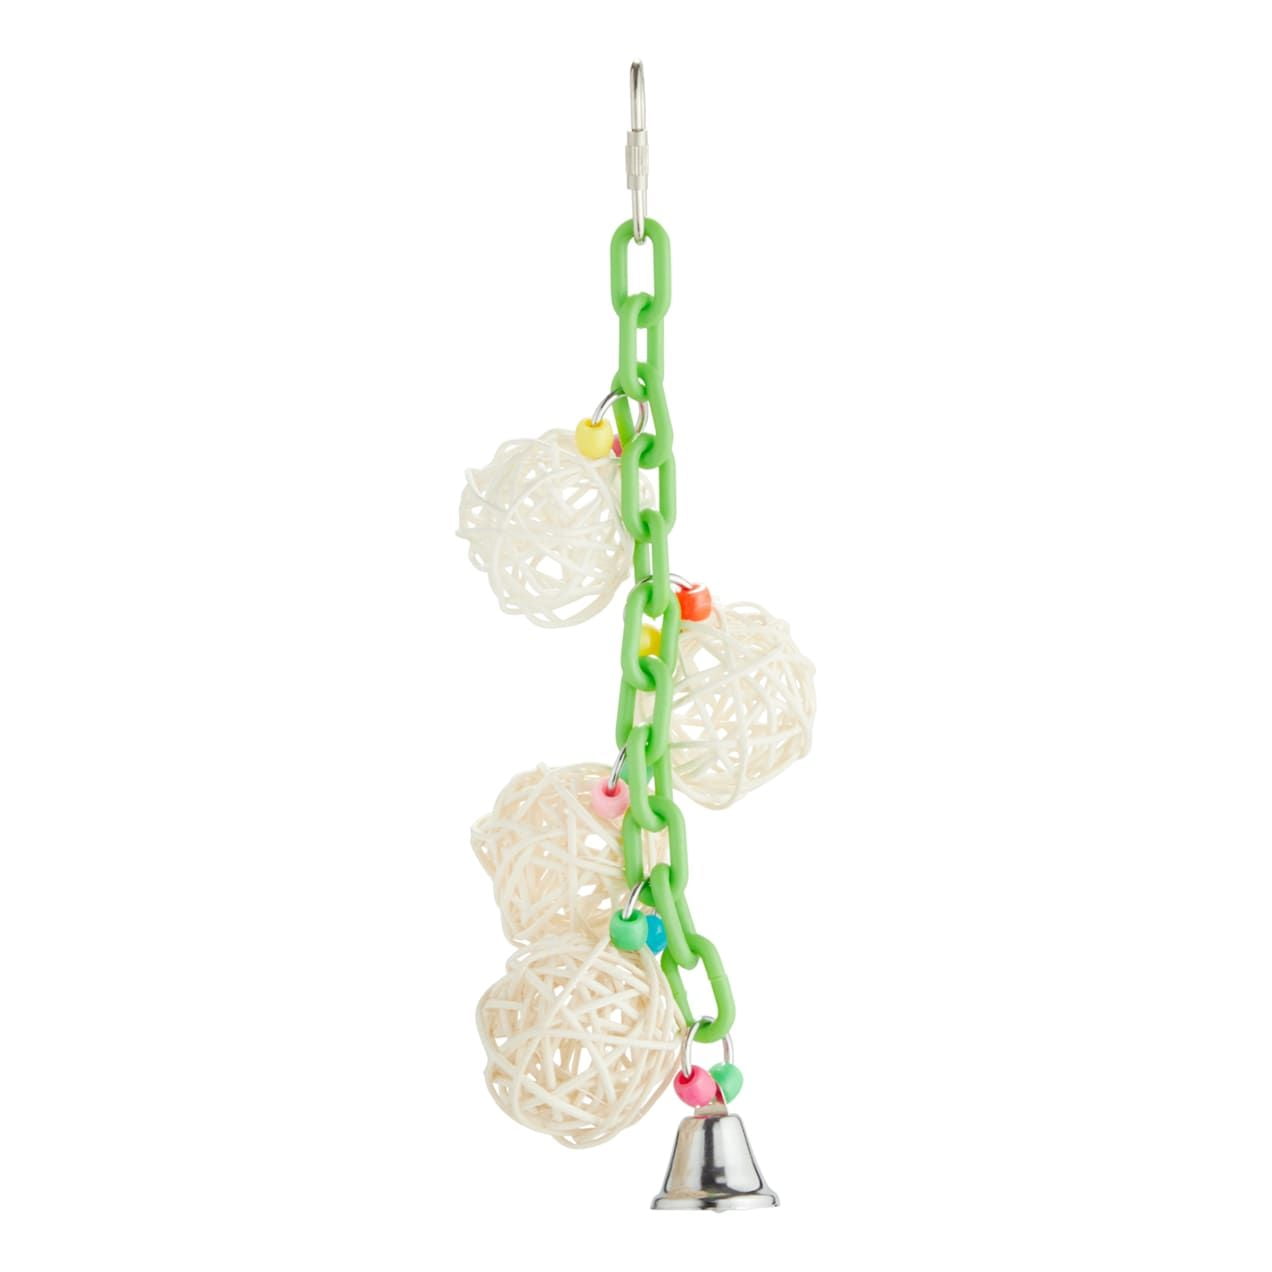 Hb01271 4 Vine Balls On Chain With Bell - 9.06 X 3.54 X 3.54 In.